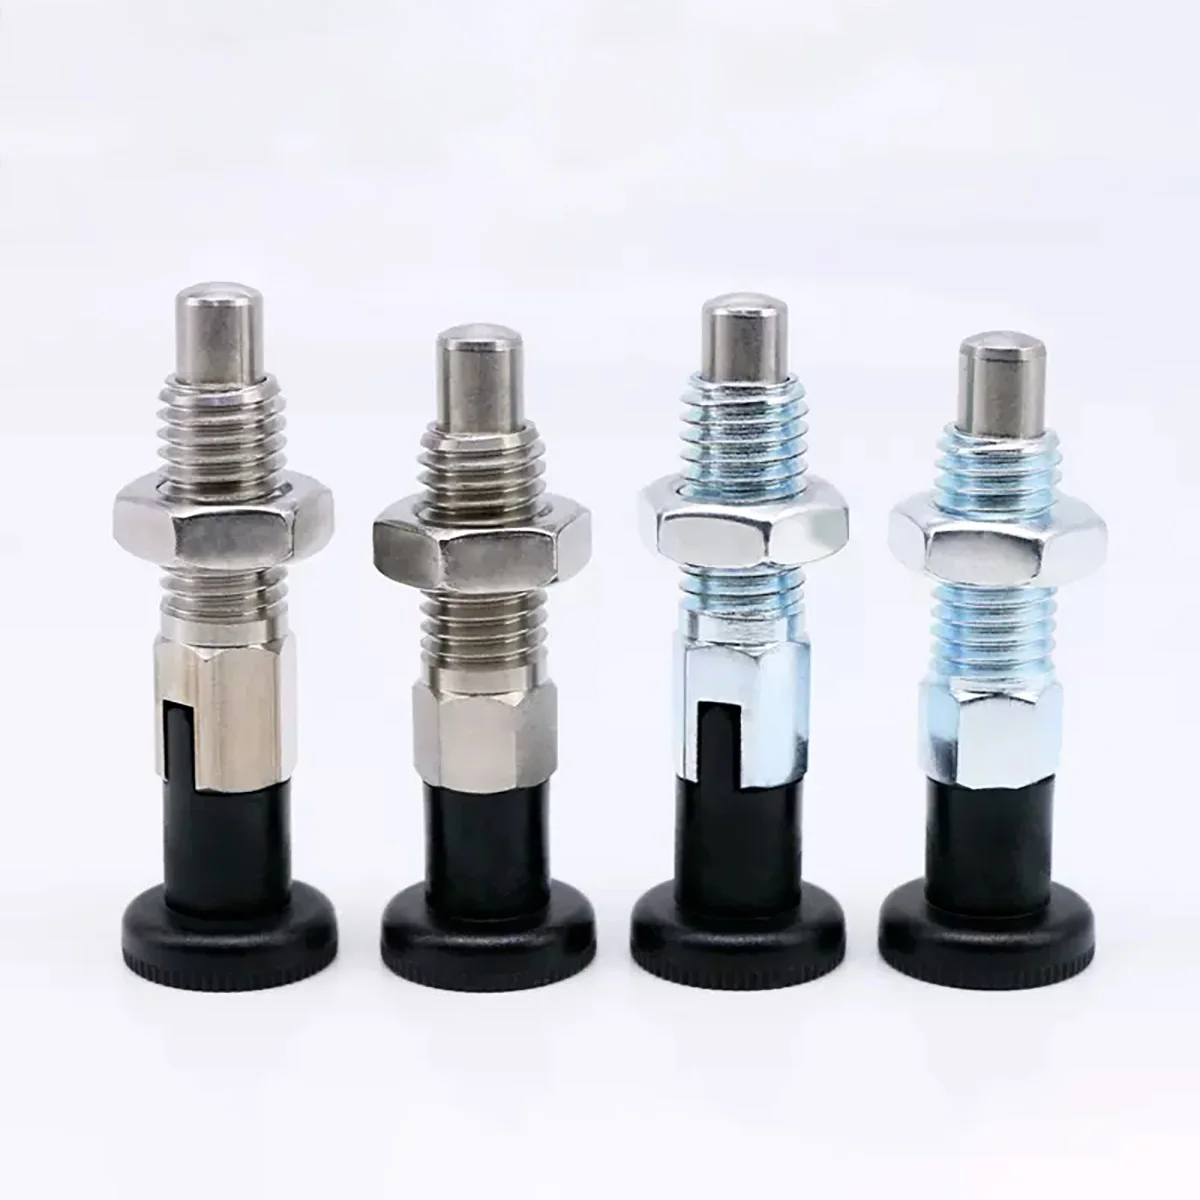 

Stainless Steel/Carbon Steel Knob Plunger Self-Locking/Reset Type Spring Positioning Pin Coarse Thread